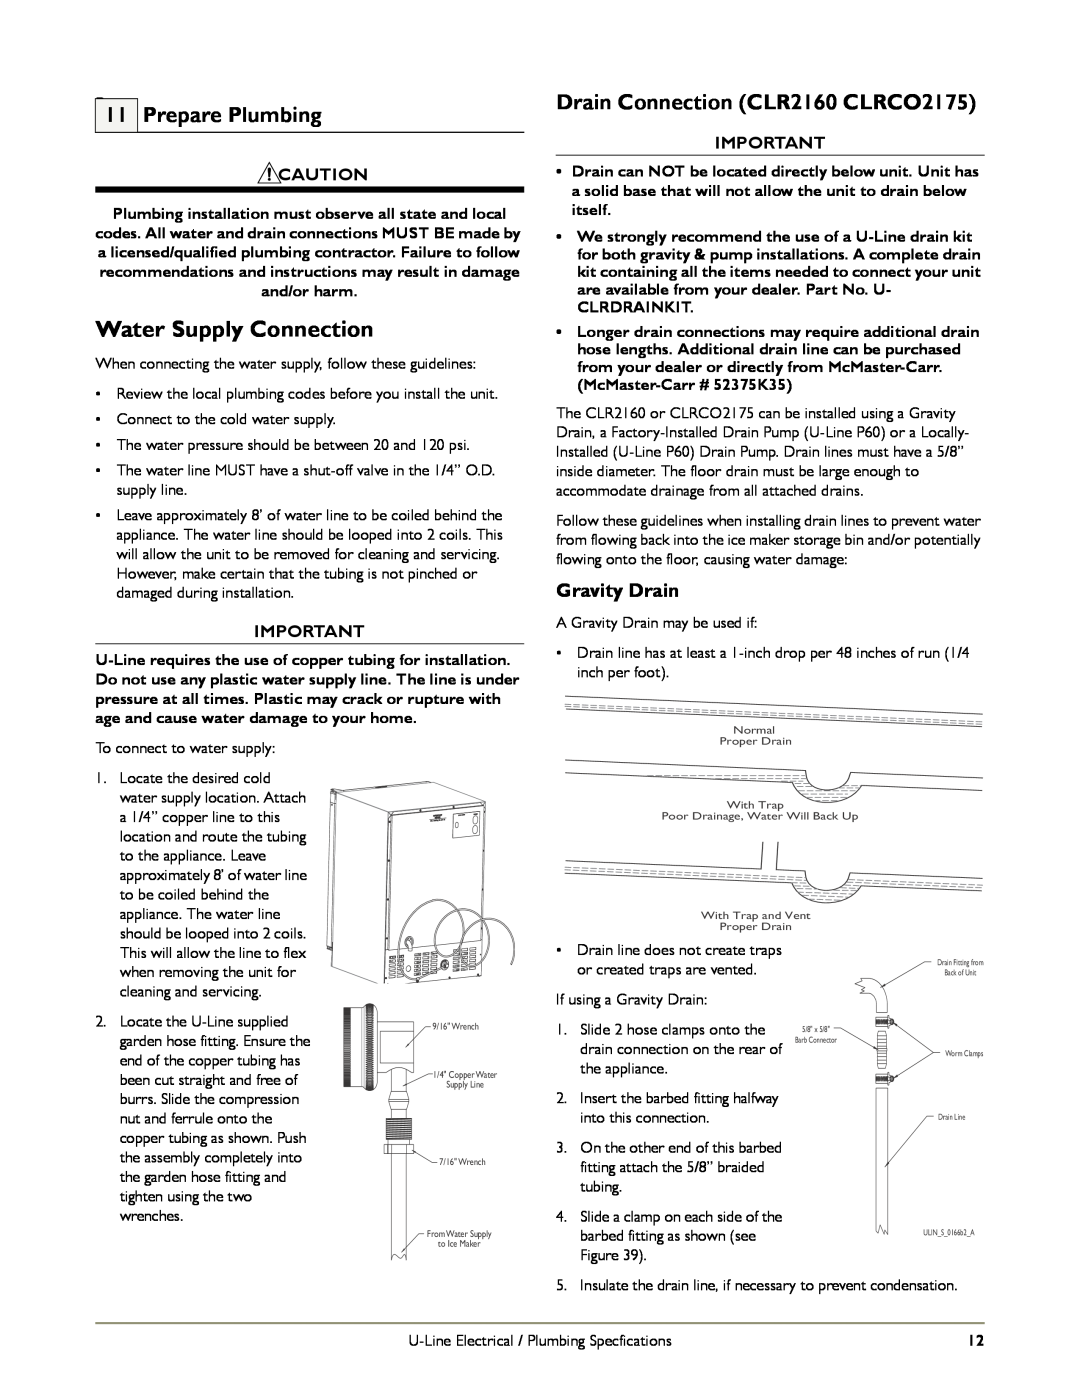 U-Line CO1175 manual Water Supply Connection, P11 Prepare Plumbing, Drain Connection CLR2160 CLRCO2175, Gravity Drain 